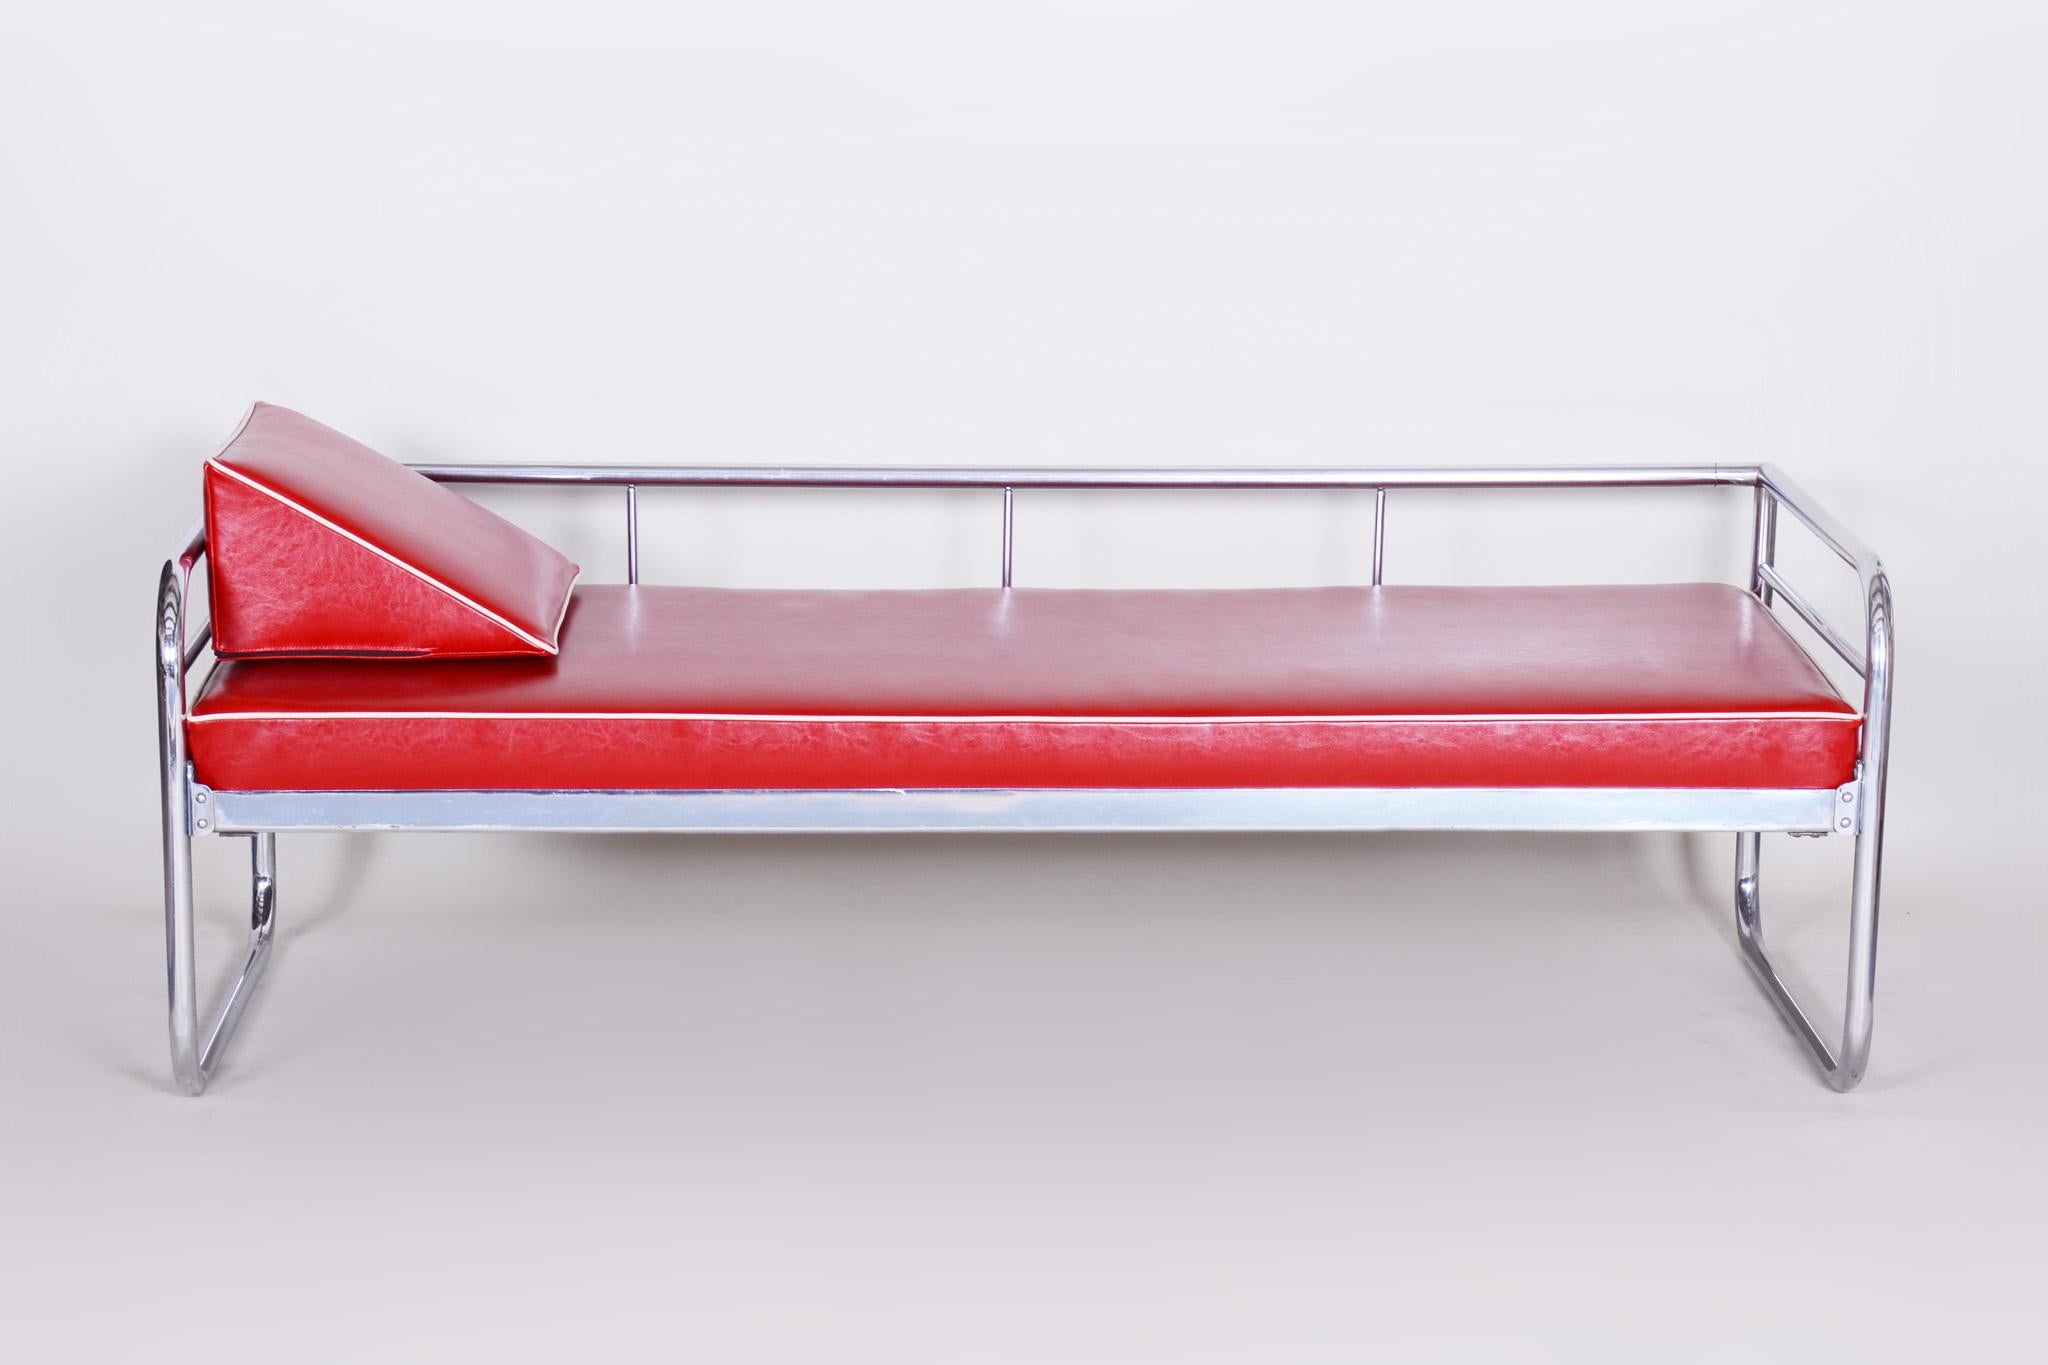 Bauhaus style sofa with chrome-plated steel tubular frame.
Manufactured by Hynek Gottwald in the 1930s.
Chrome tubular steel is in perfect original condition.
New upholstery
Source: Czechia (Czechoslovakia).